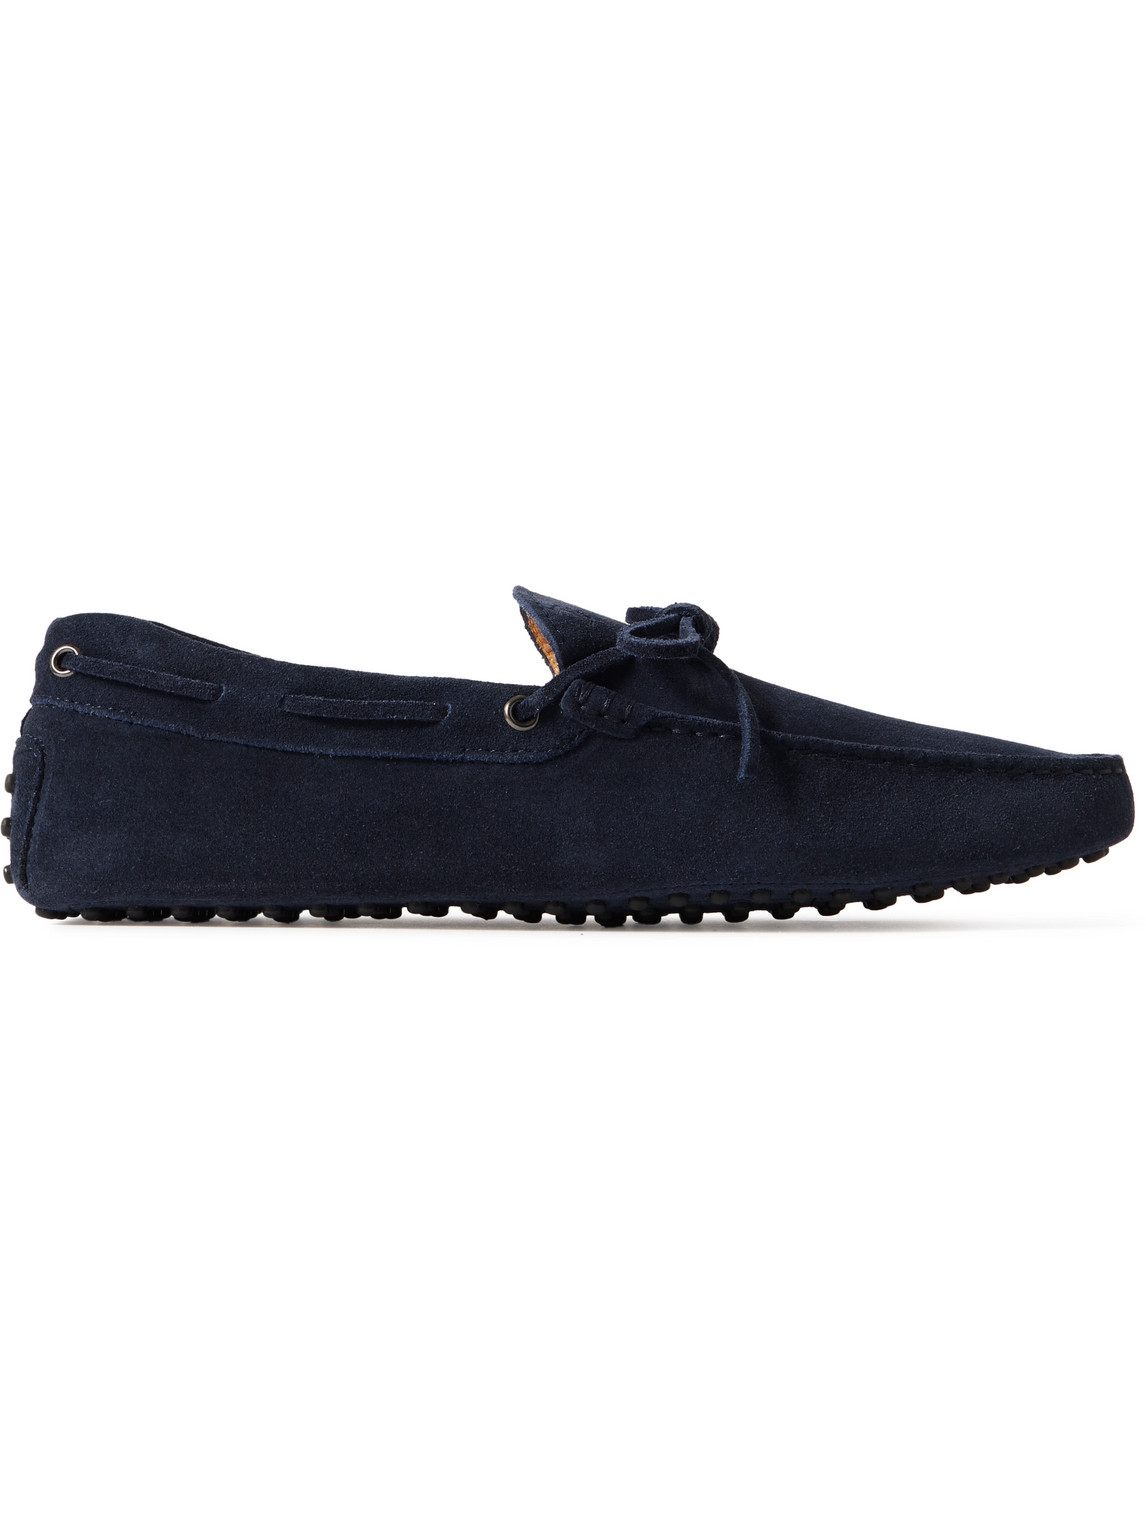 Tod's - Gommino Suede Driving Shoes - Men - Blue - UK 9.5 von Tod's